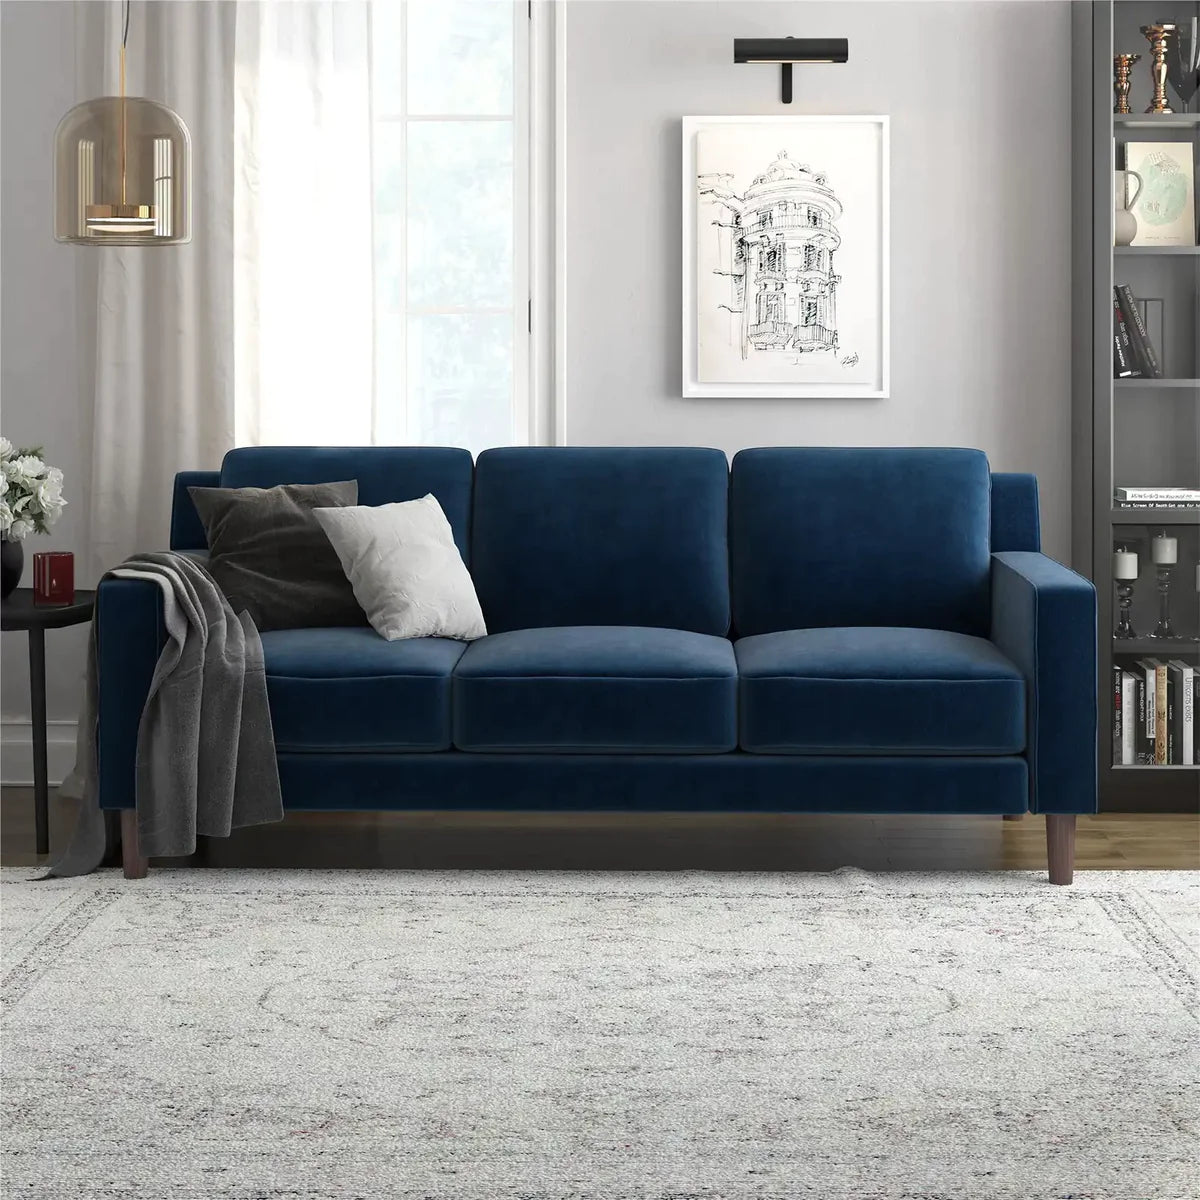 How to Find the Perfect Sofa in America: The Ultimate Guide